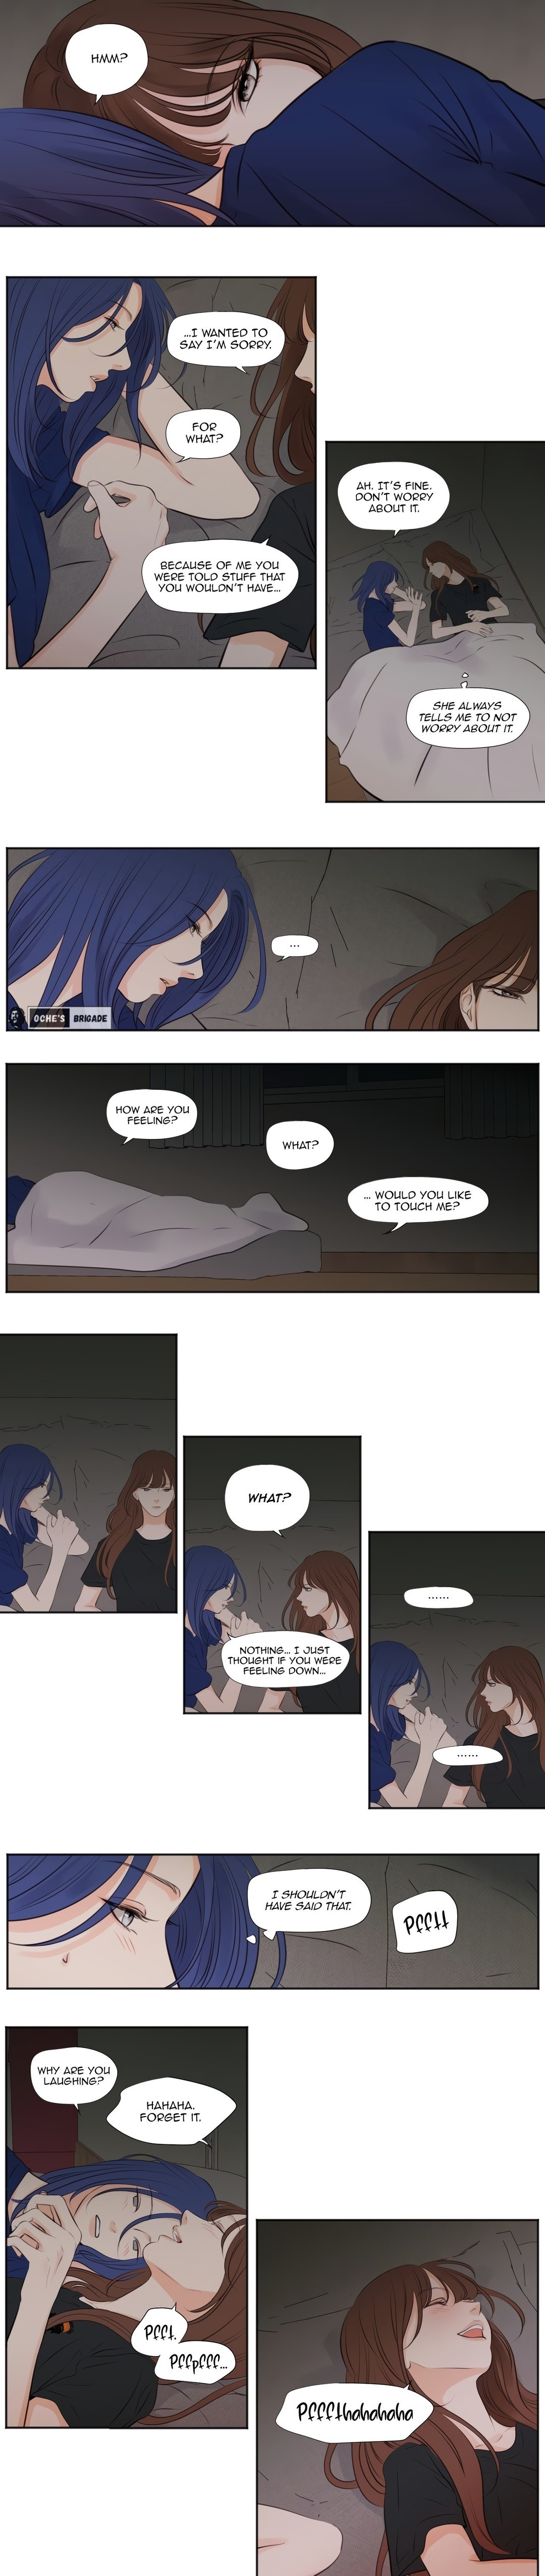 Show Me Your Bust - Chapter 27 Page 7